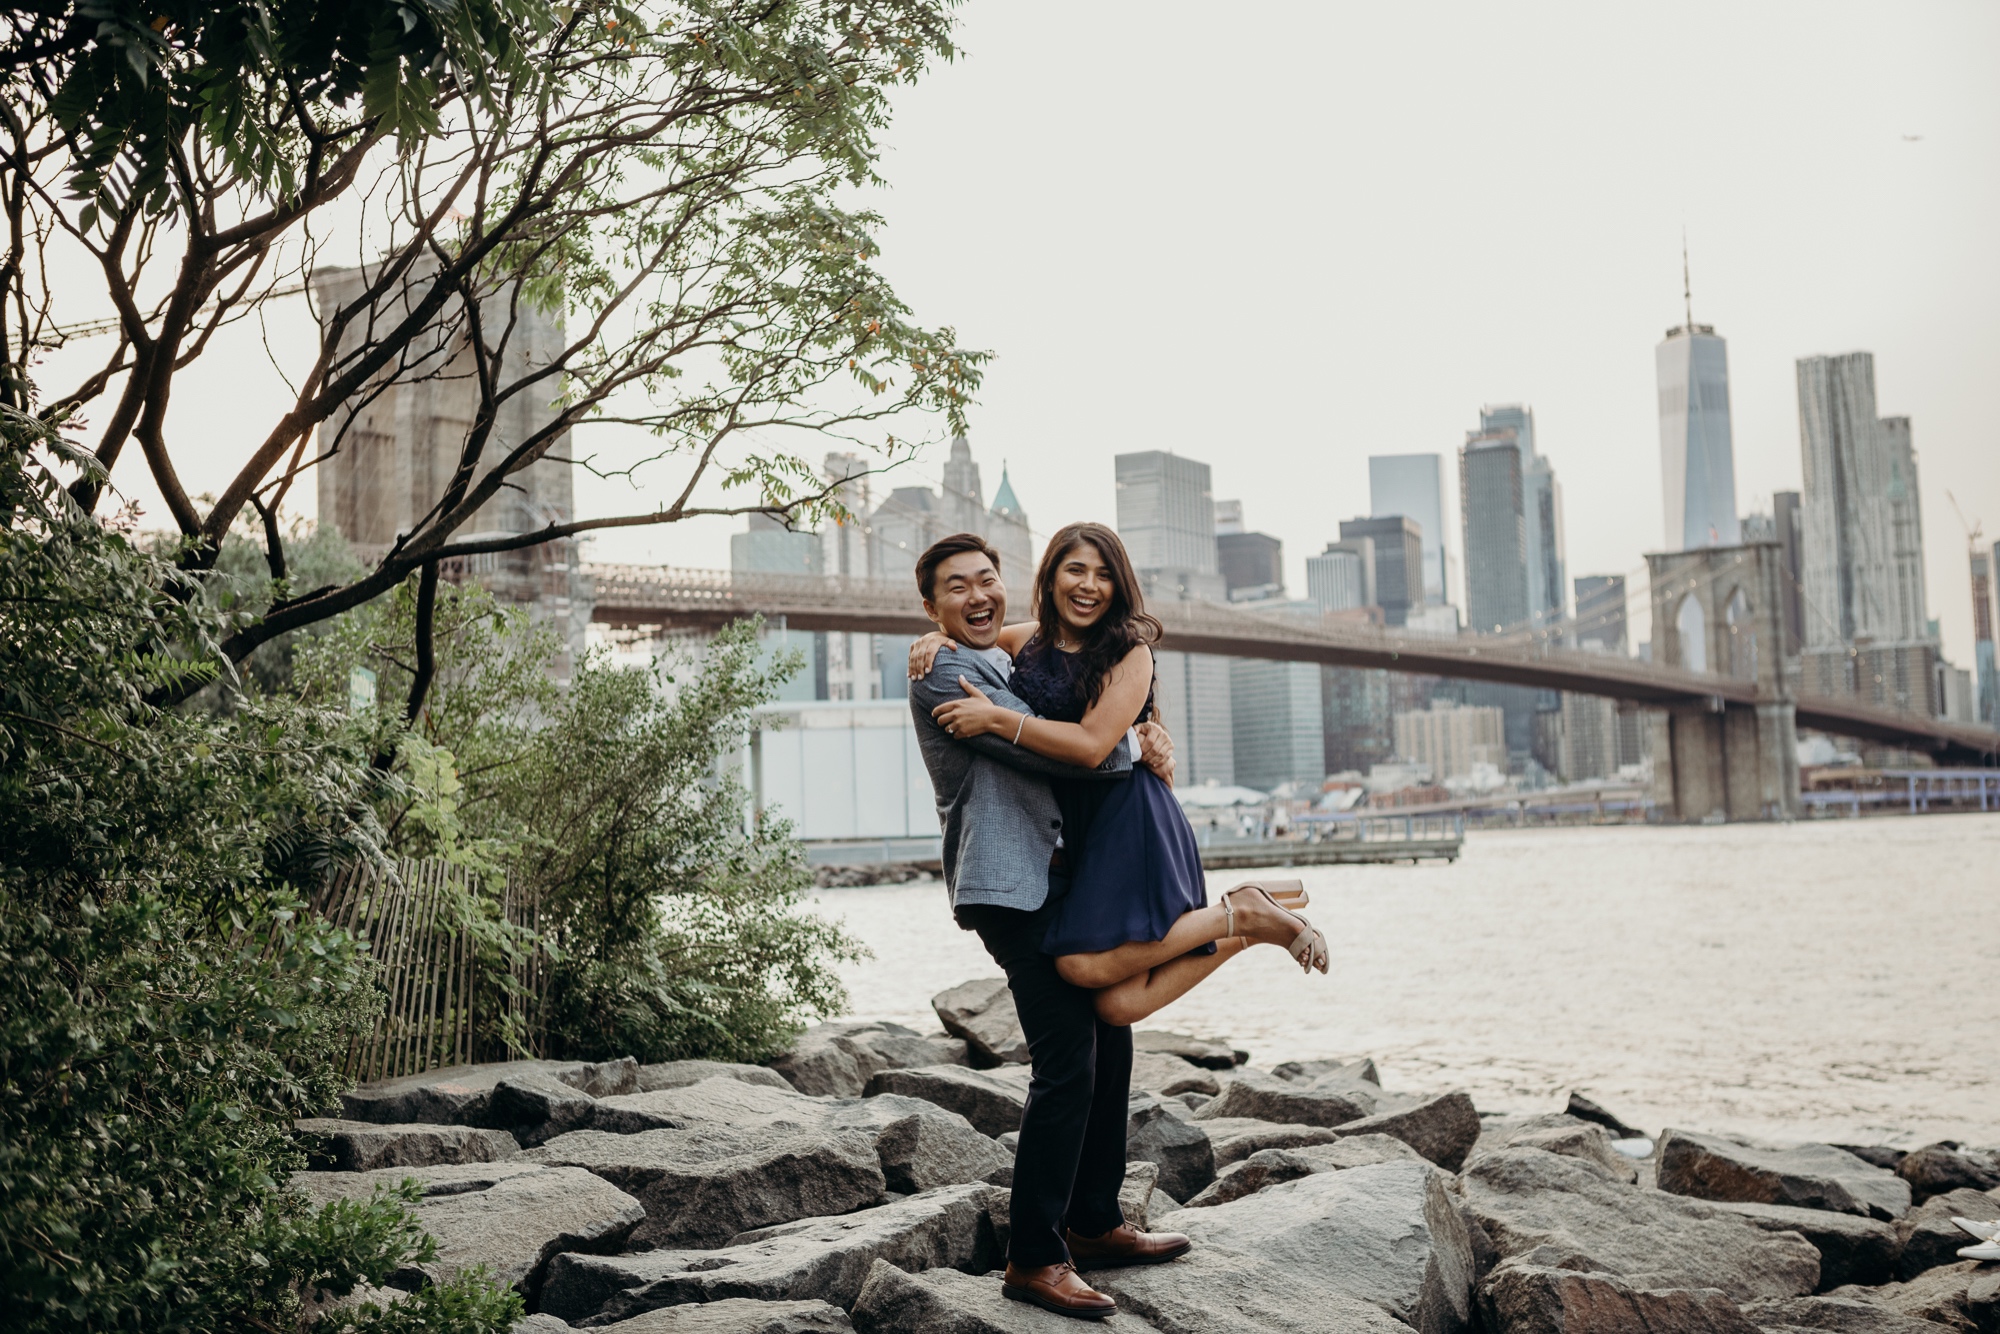 engagement photos of a couple in front of the brooklyn bridge, dumbo